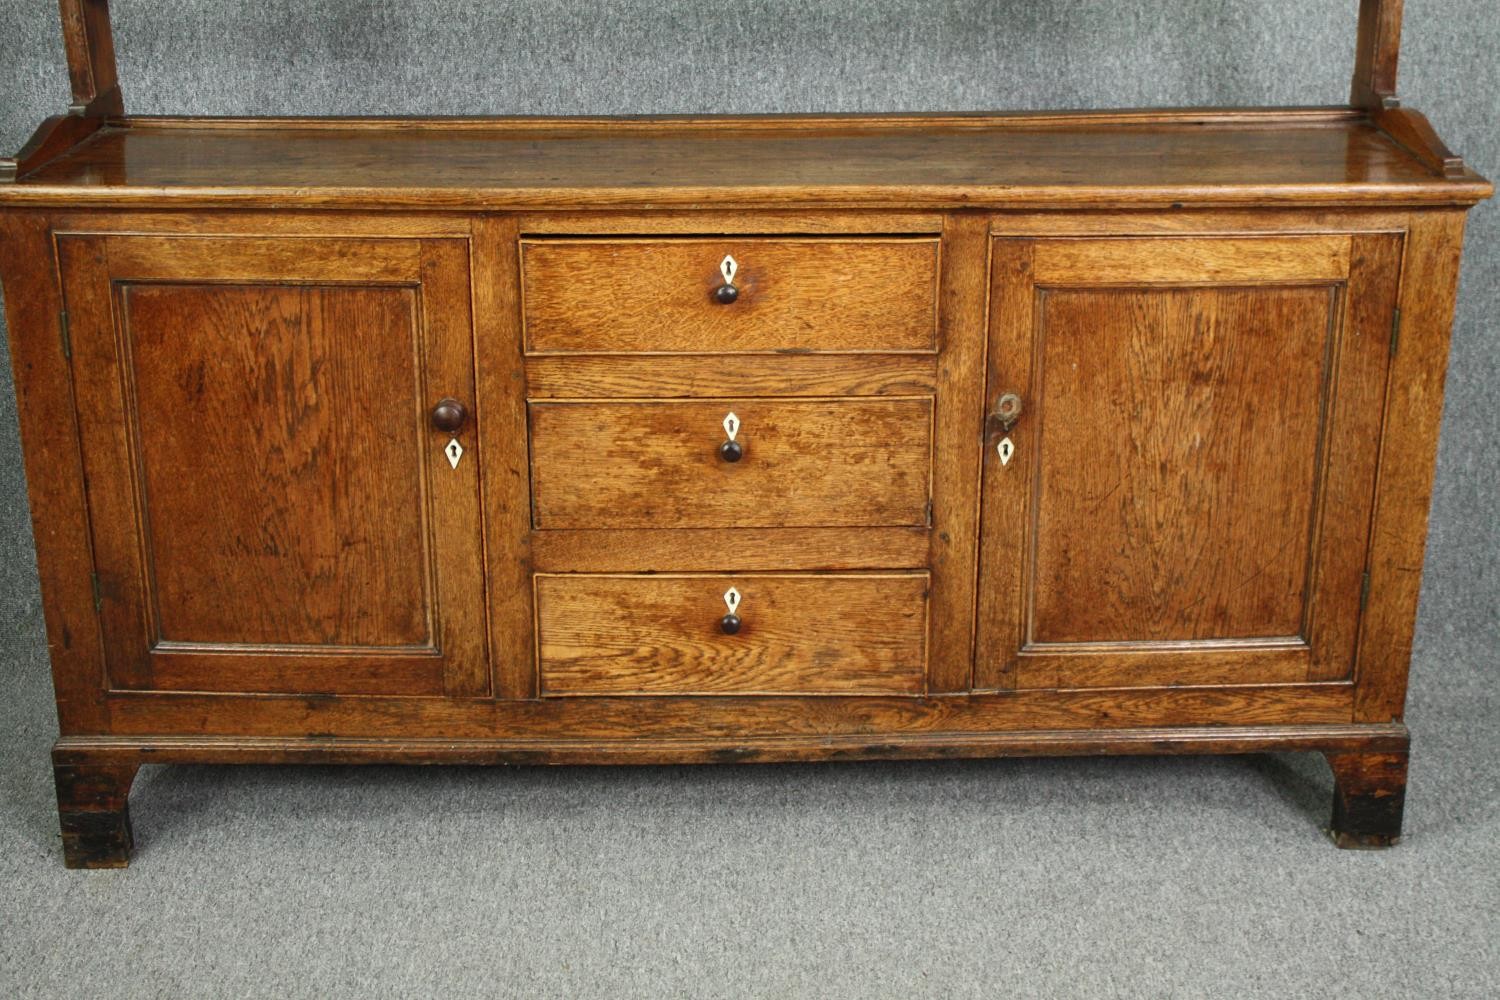 Dresser, 19th century country oak with upper open plate rack above base fitted with drawers - Image 4 of 11